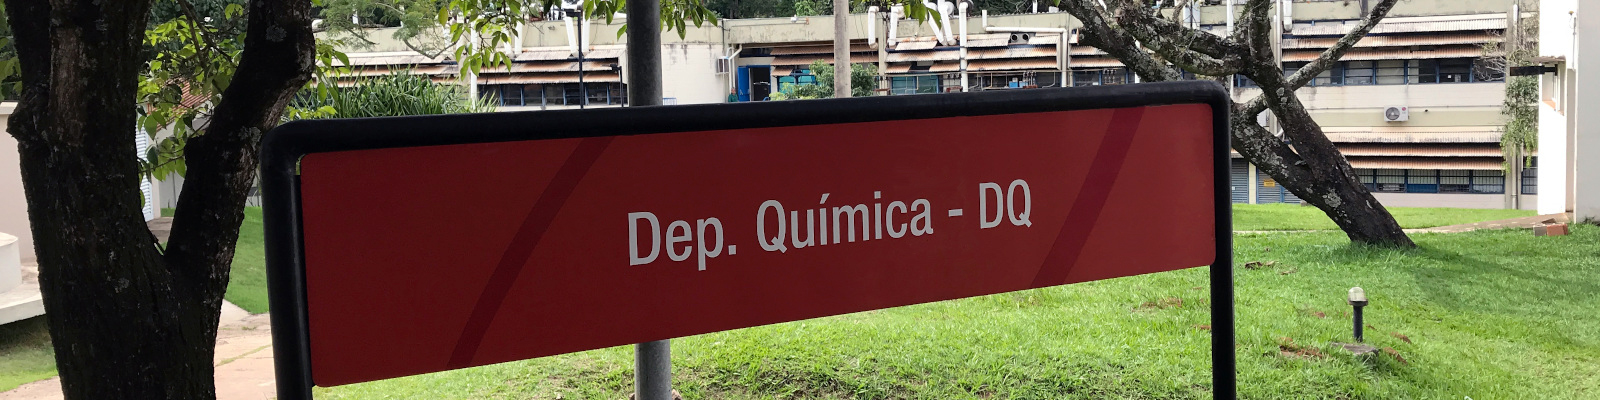 The image shows, in the foreground, a red sign, taking up most of the image, with white writing “Dep. Química – DQ” (Chemistry Dept.), serving to identify where the department is located. In the background, it is possible to notice the northern façade of the department, which is white, with several windows and apparent installations, in addition to some of the local vegetation.